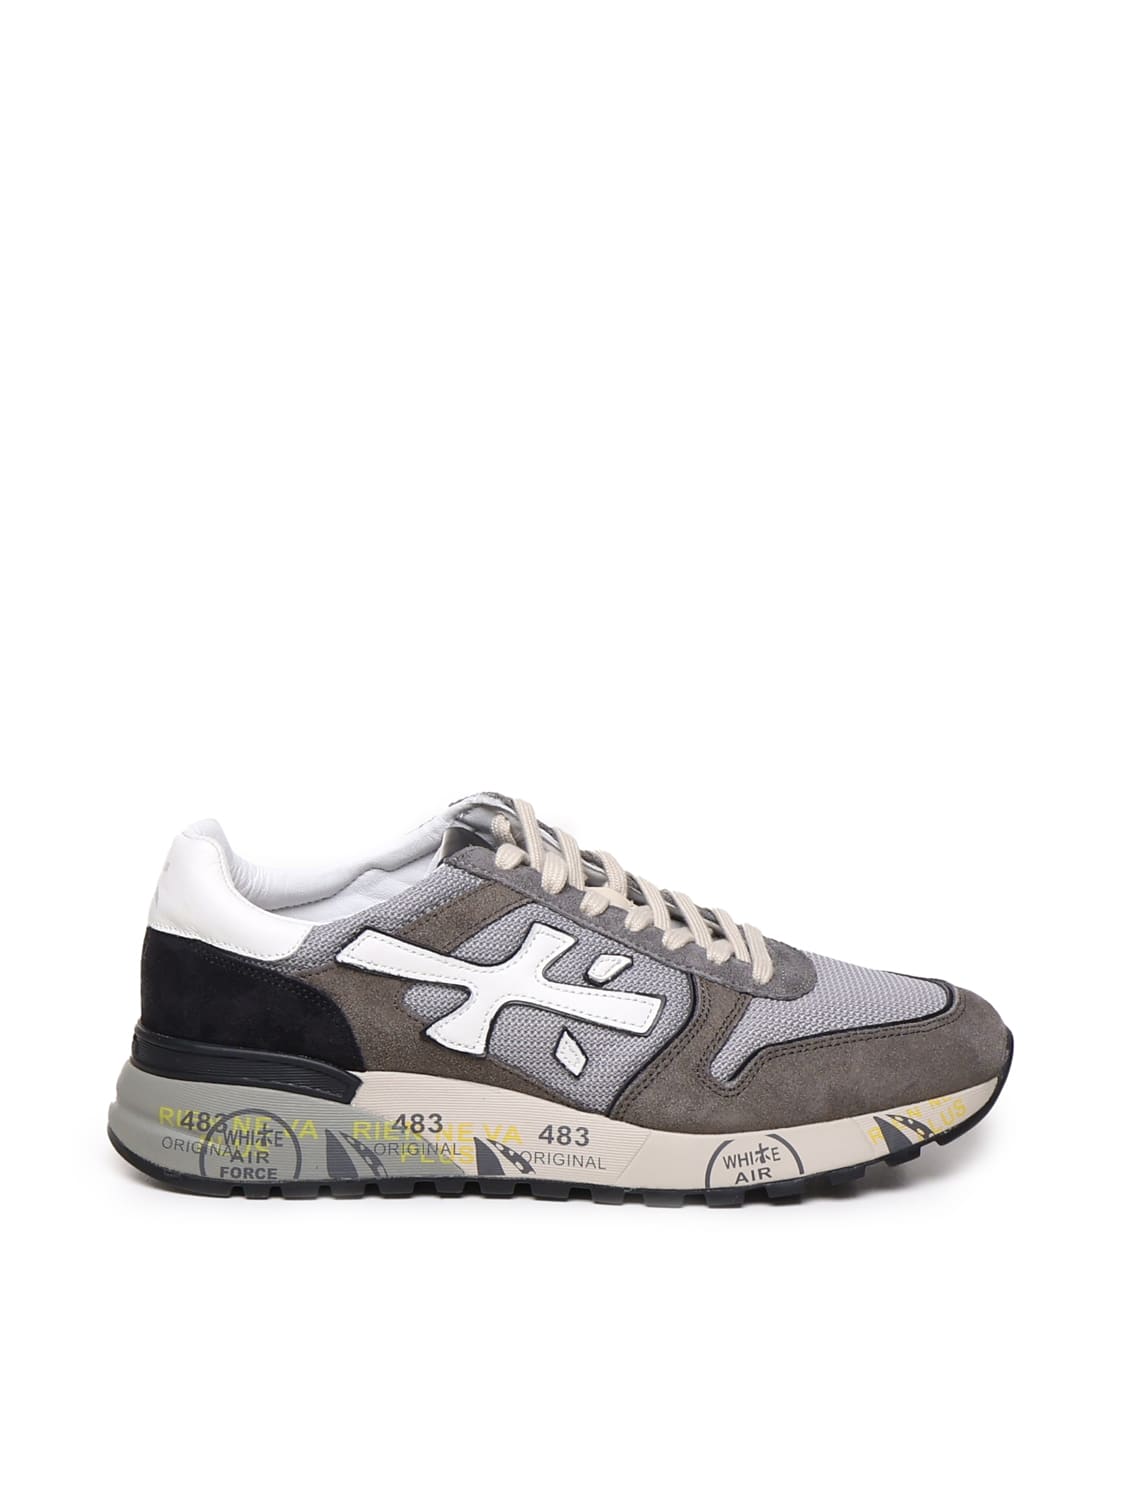 Premiata Sneakers Mick In Suede And Eva In Taupe, Grey, Black, White